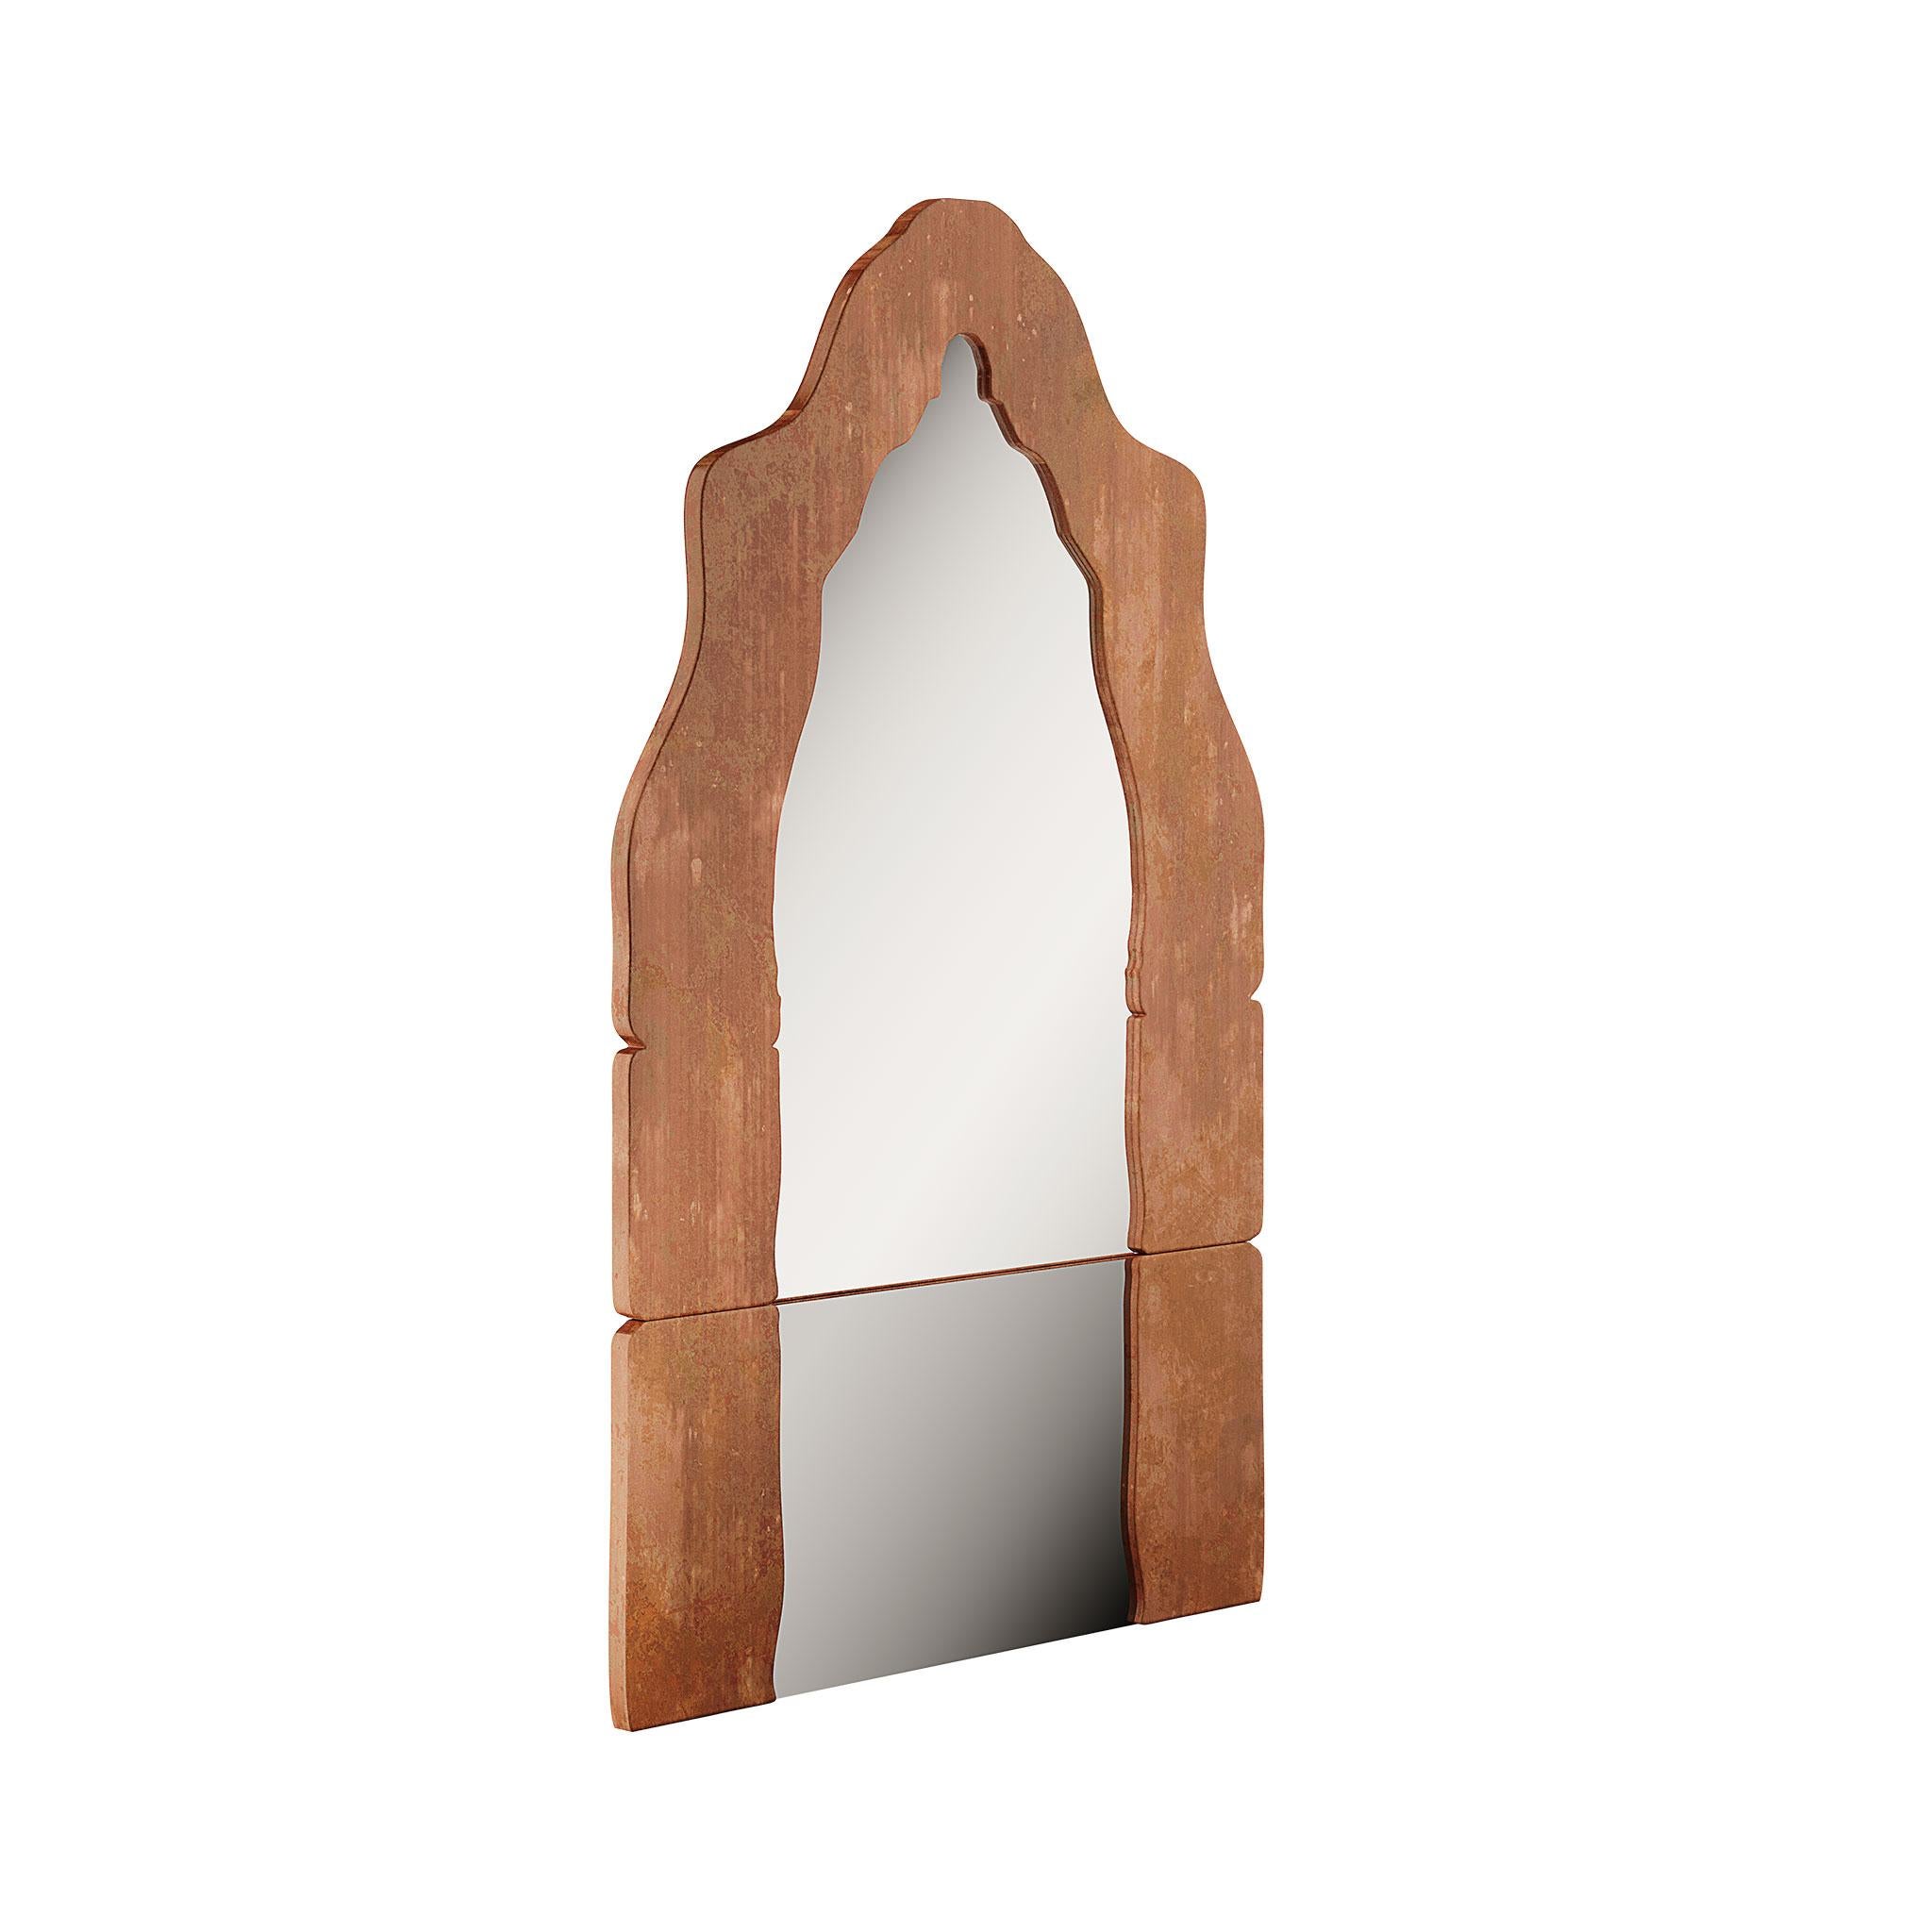 Introduce a unique and commanding piece into your decor with our Contemporary Brutalist Mirror in Corten Steel, meticulously hand-carved. This mirror is not just a functional item but an artistic expression that combines brutalist style with